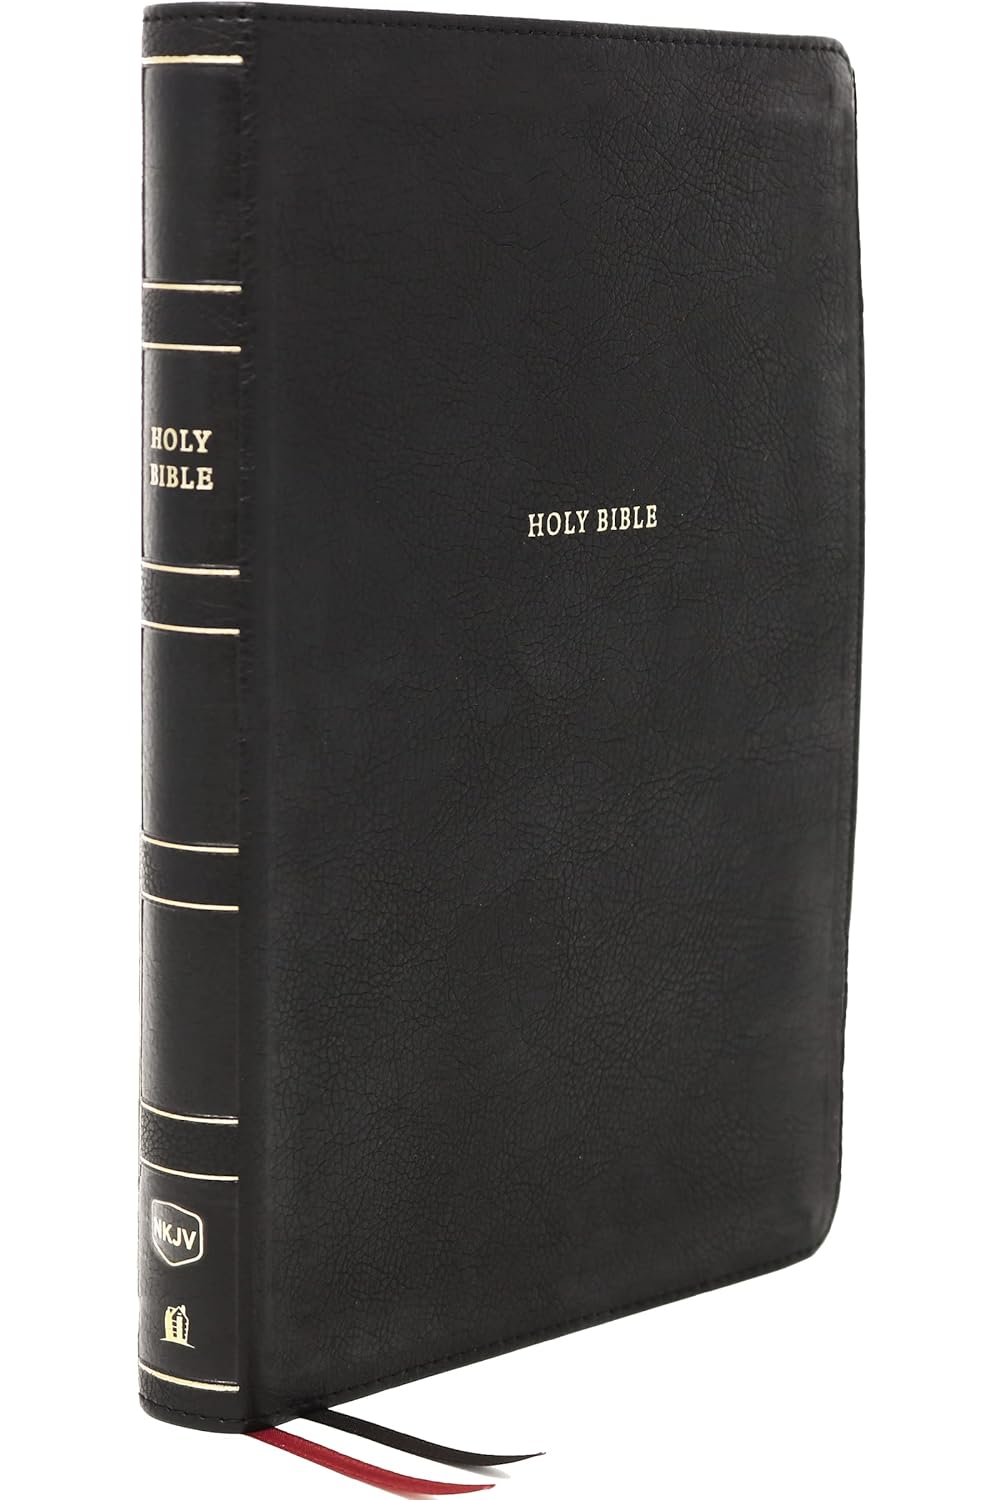 NKJV, Thinline Reference Bible, Large Print, Leathersoft, Black/Brown, Red Letter, Comfort Print: Holy Bible, New King James Version Imitation Leather – Import,